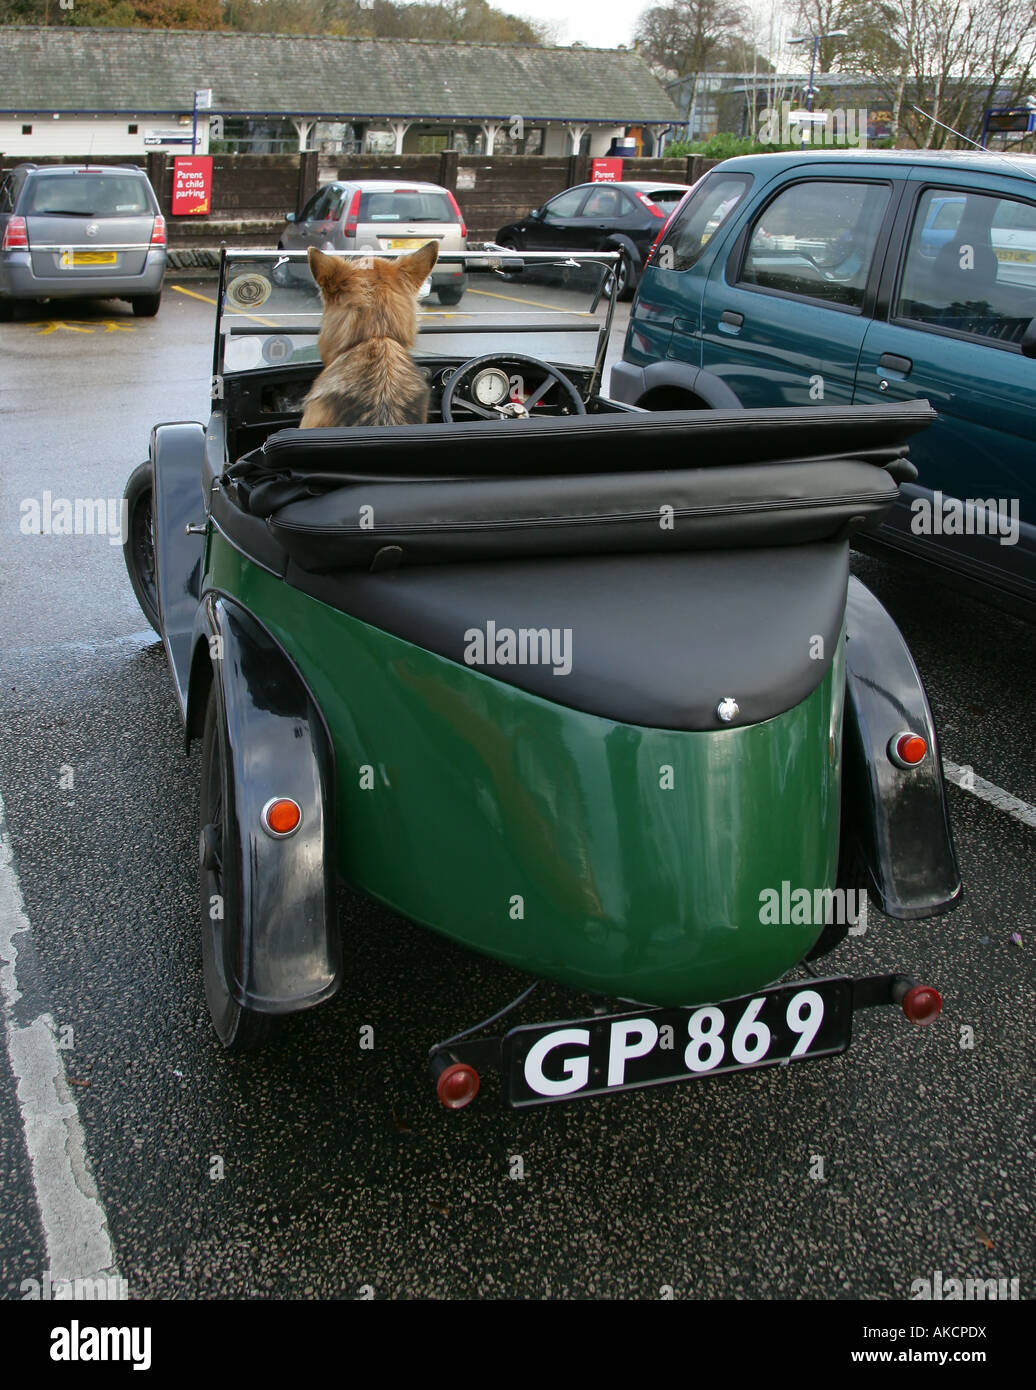 An Austin Seven convertible automobile sits parked in a car park with hood down and alsatian as passenger Stock Photo